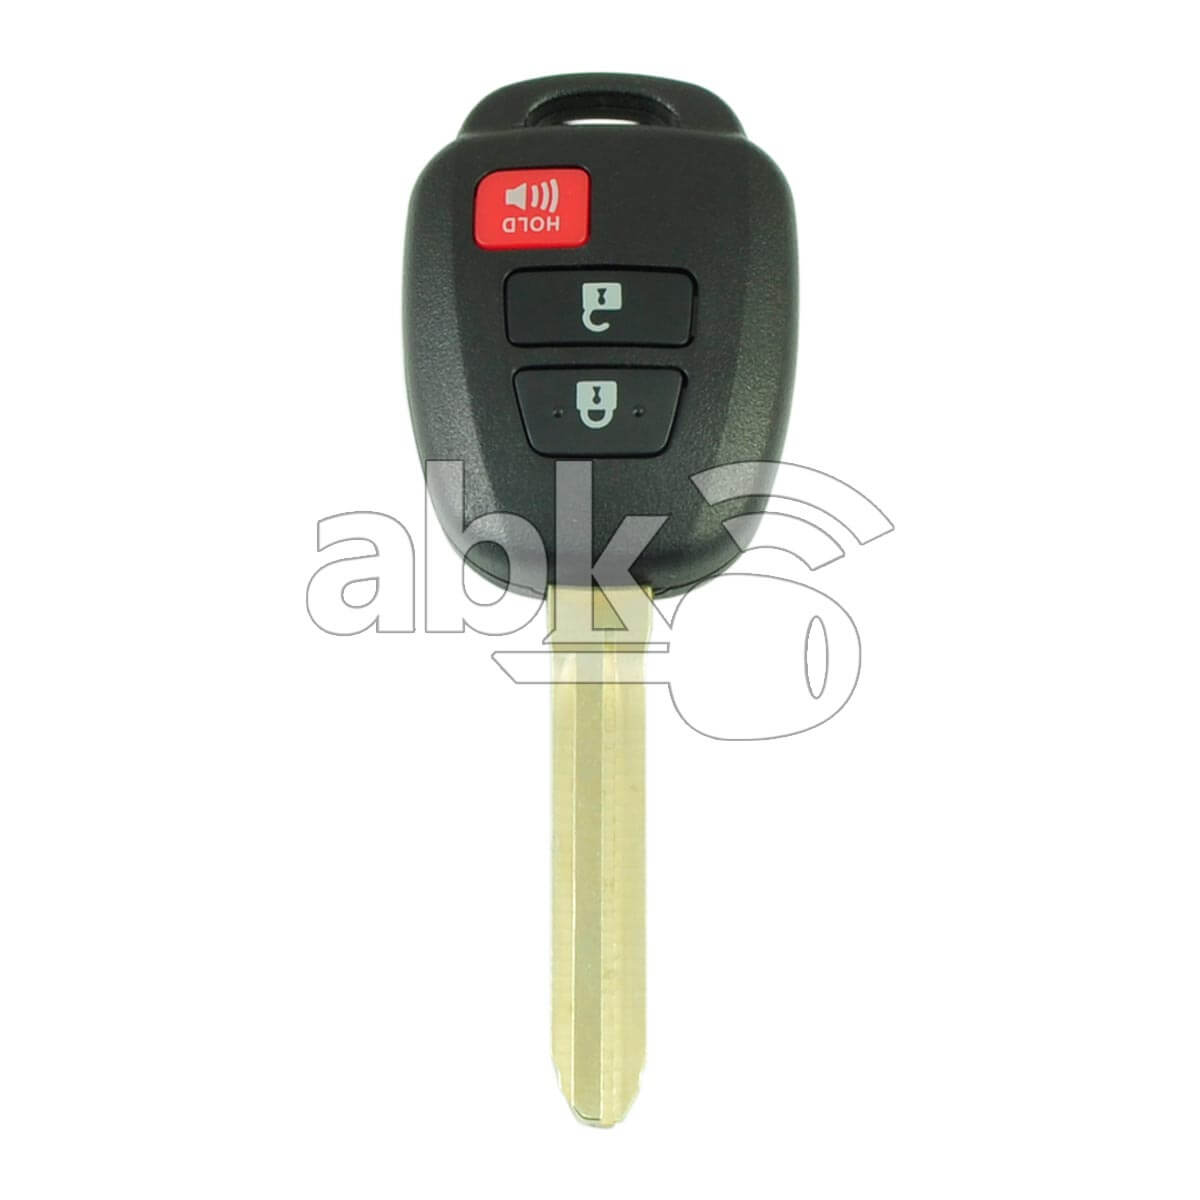 Toyota 2012+ Key Head Remote Cover 3Buttons TOY43 - ABK-3215 - ABKEYS.COM